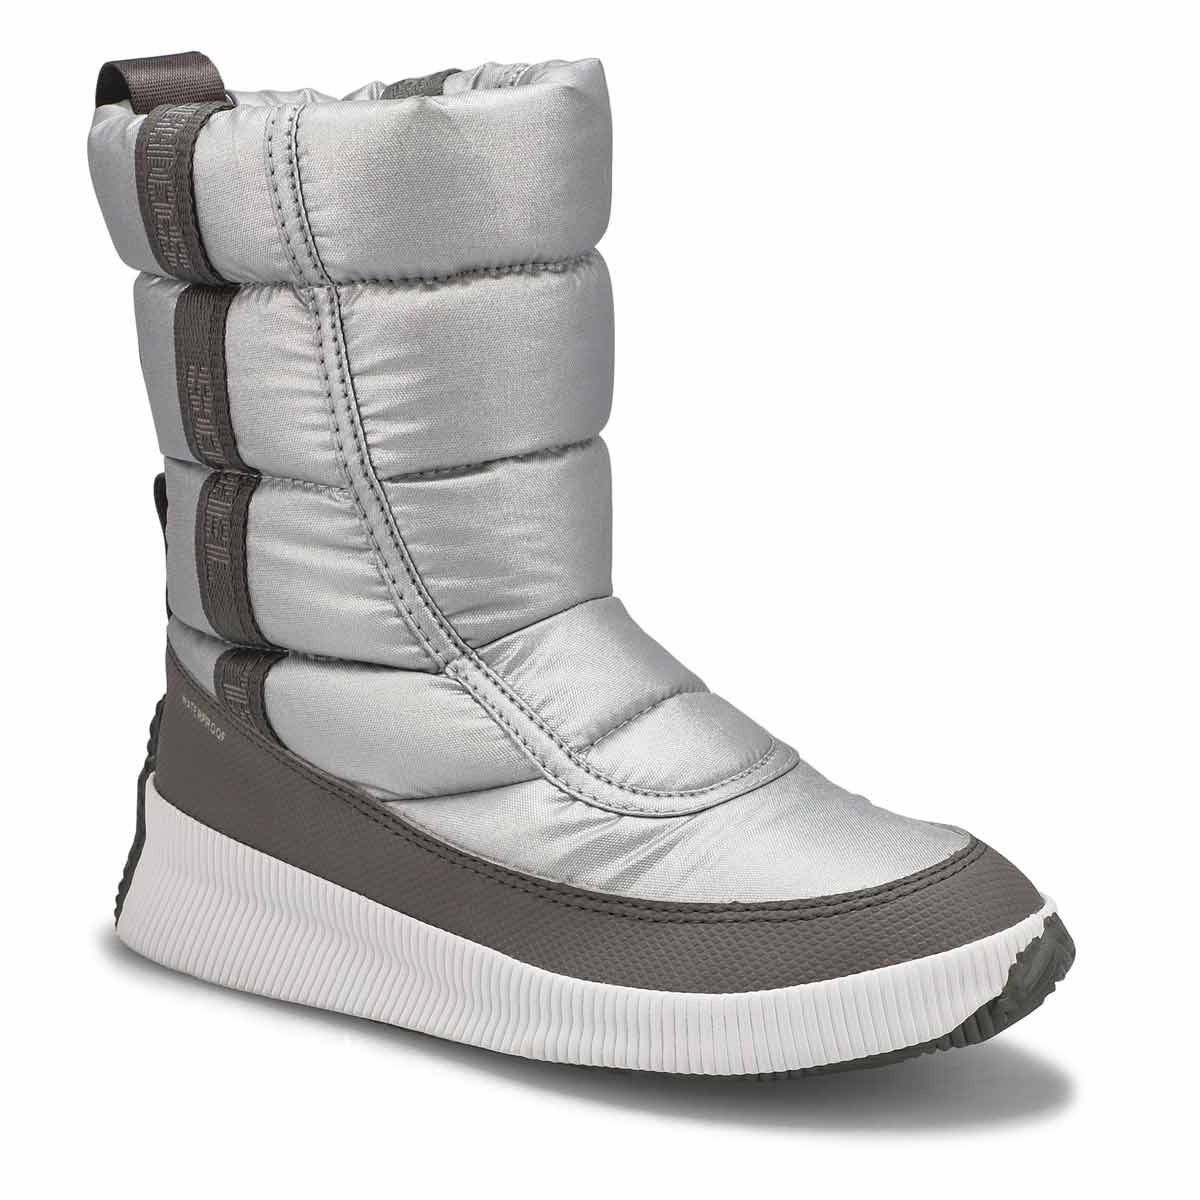 Women's OUT N' ABOUT PUFFY MID waterproof boots